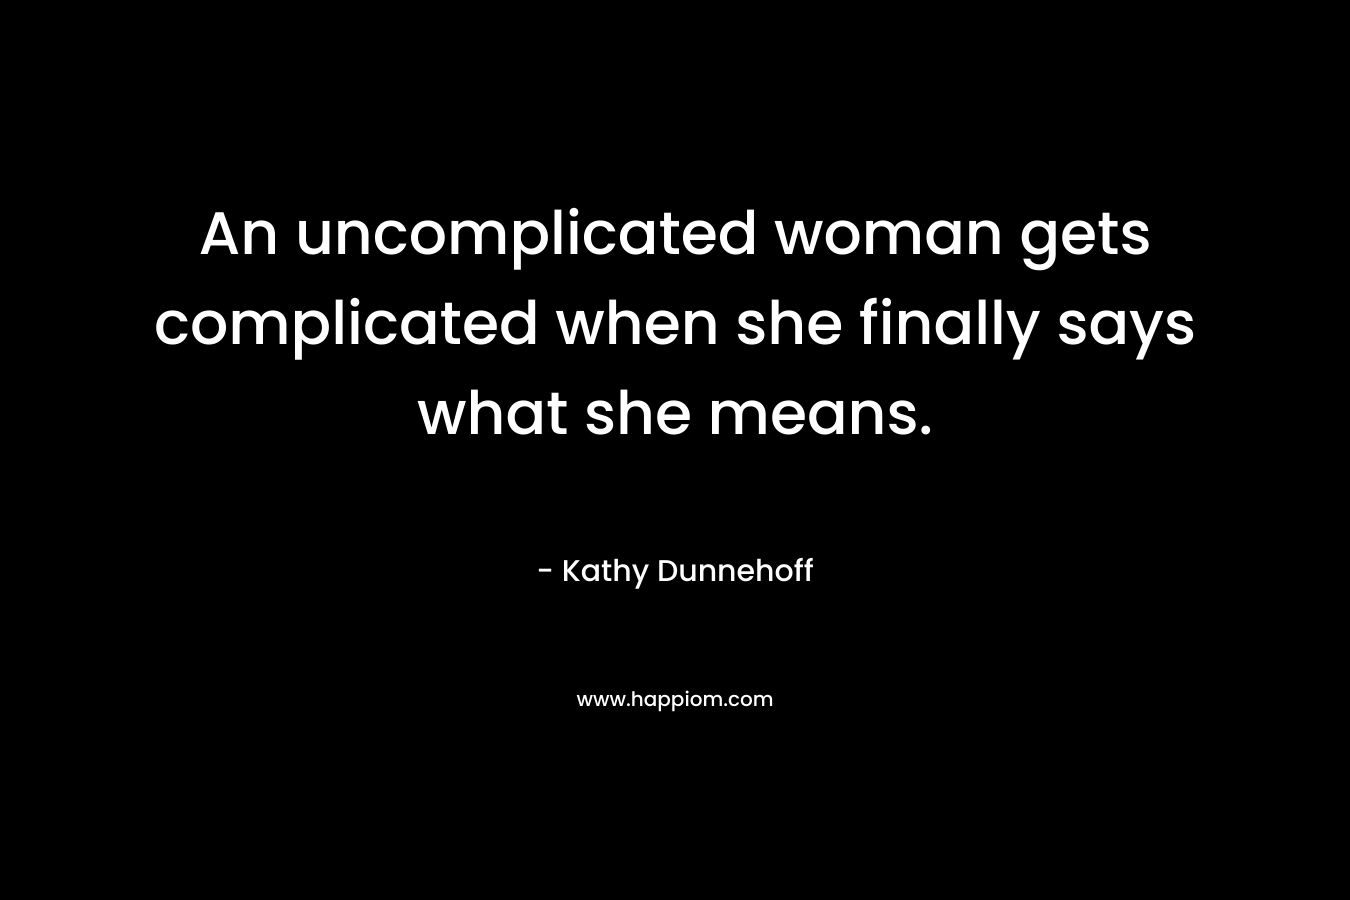 An uncomplicated woman gets complicated when she finally says what she means.